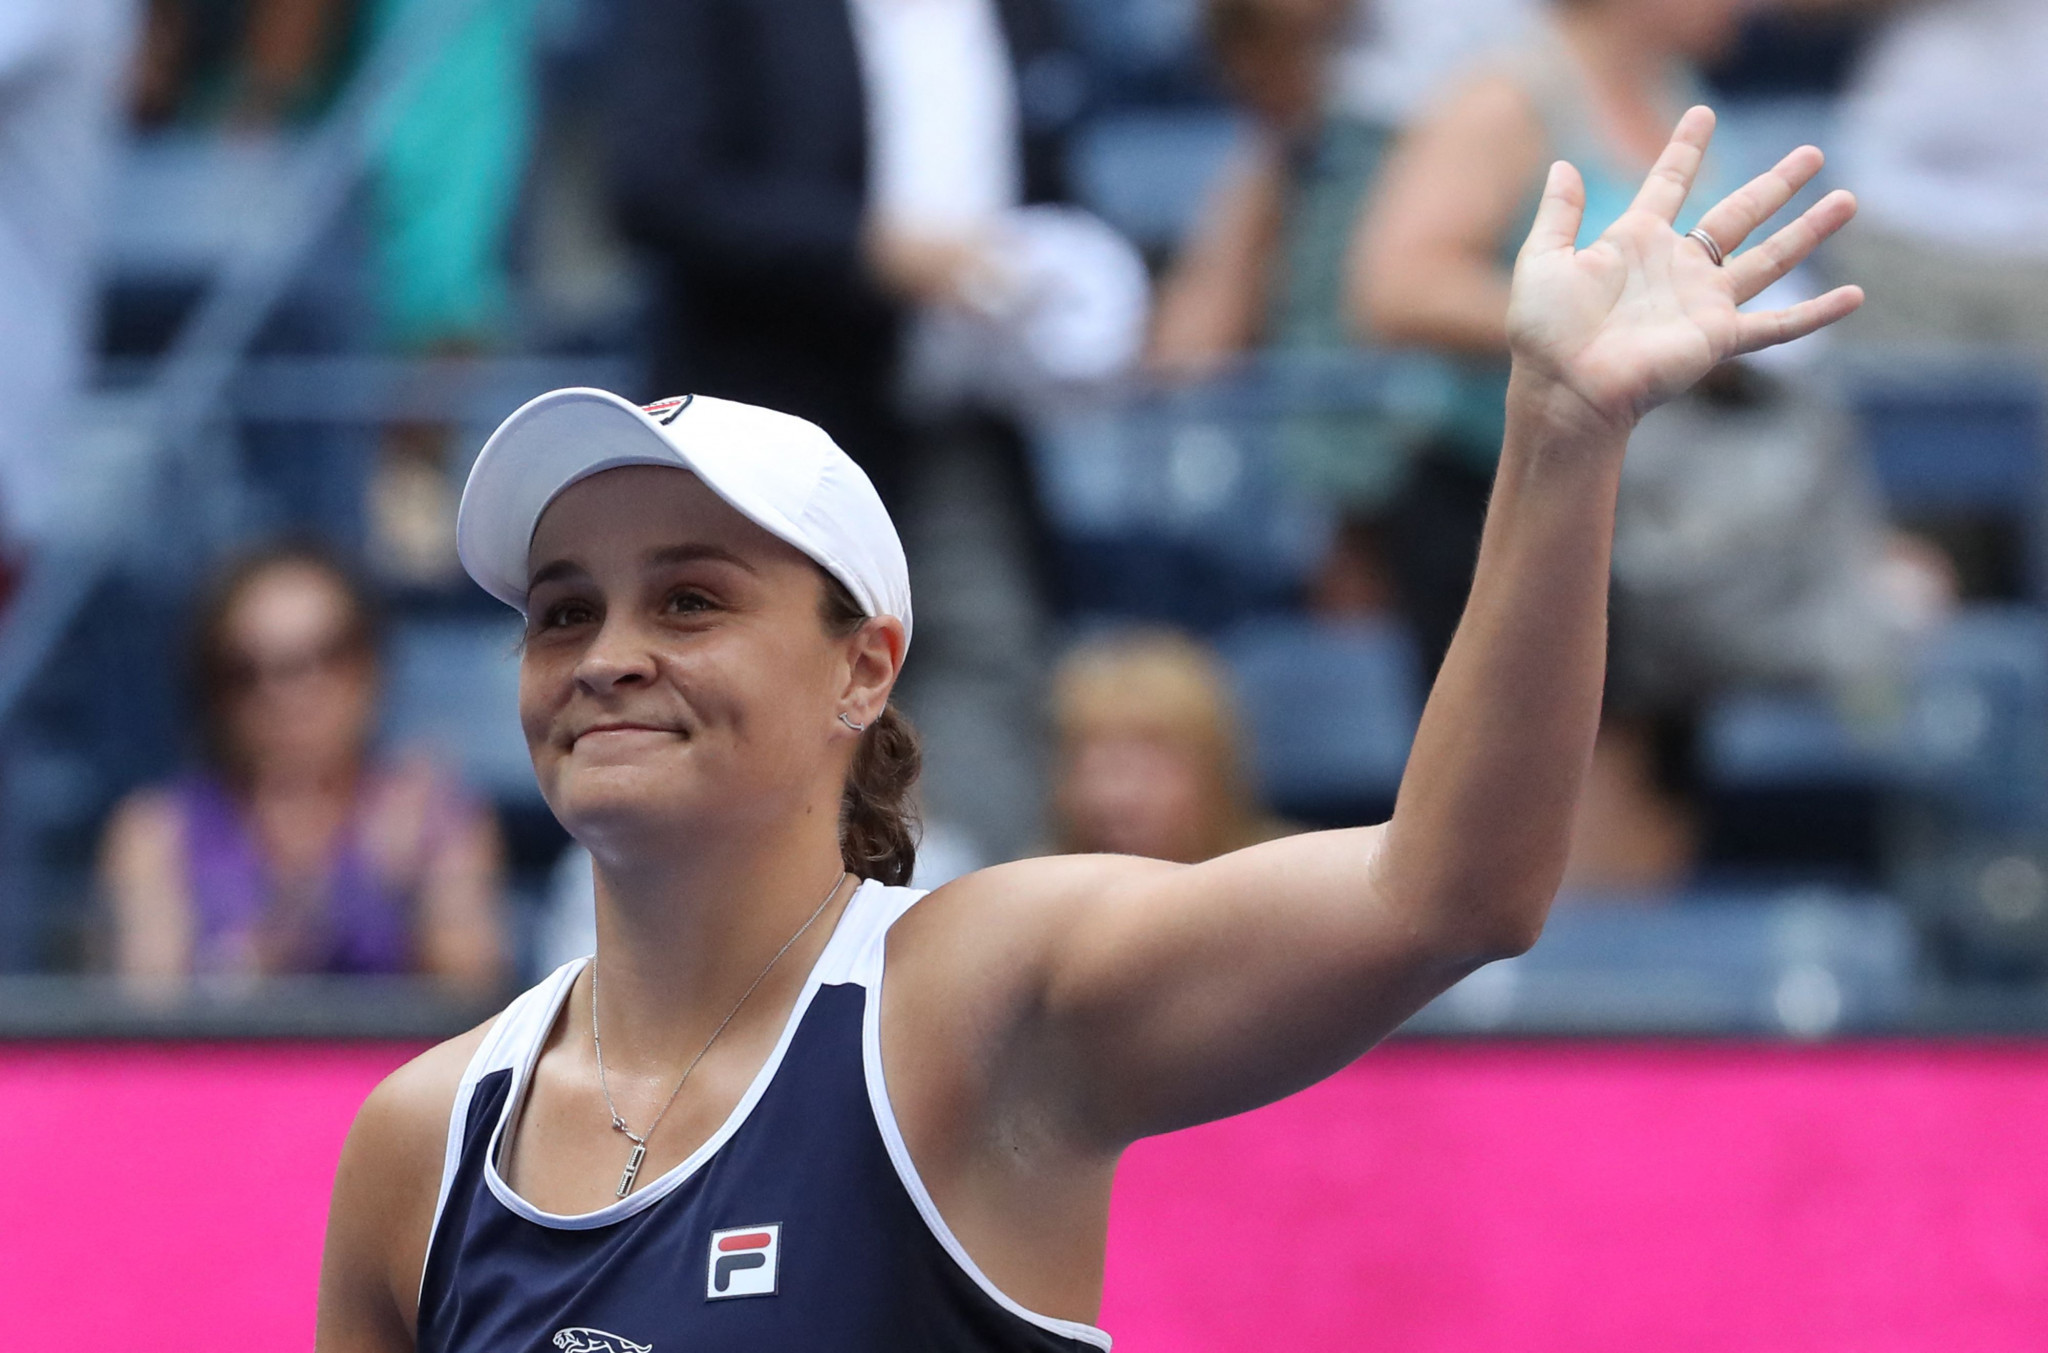 Women's top seed Ashleigh Barty was taken to a tiebreak in the second set during her first round win against Vera Zvonareva ©Getty Images